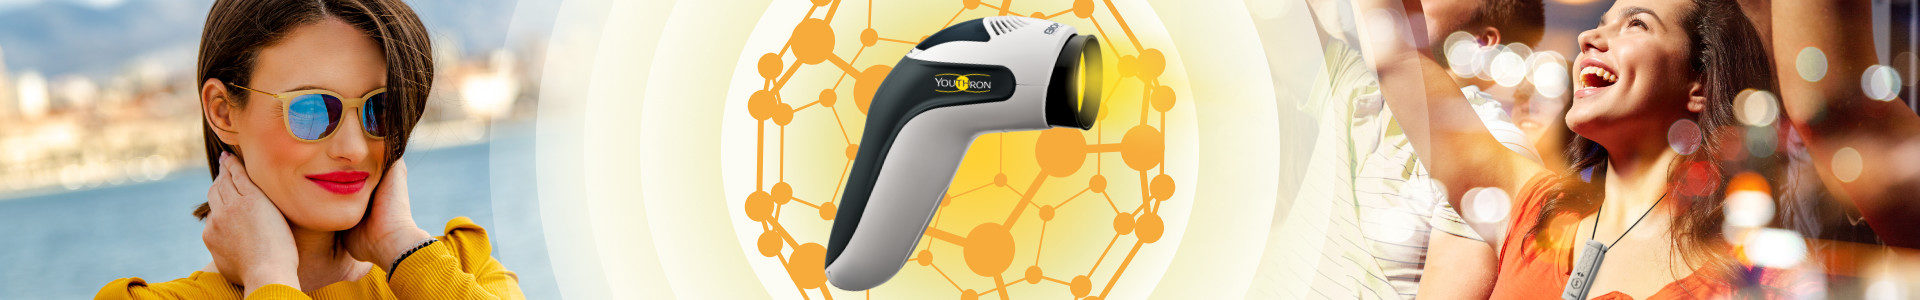 BIOPTRON Light Therapy System